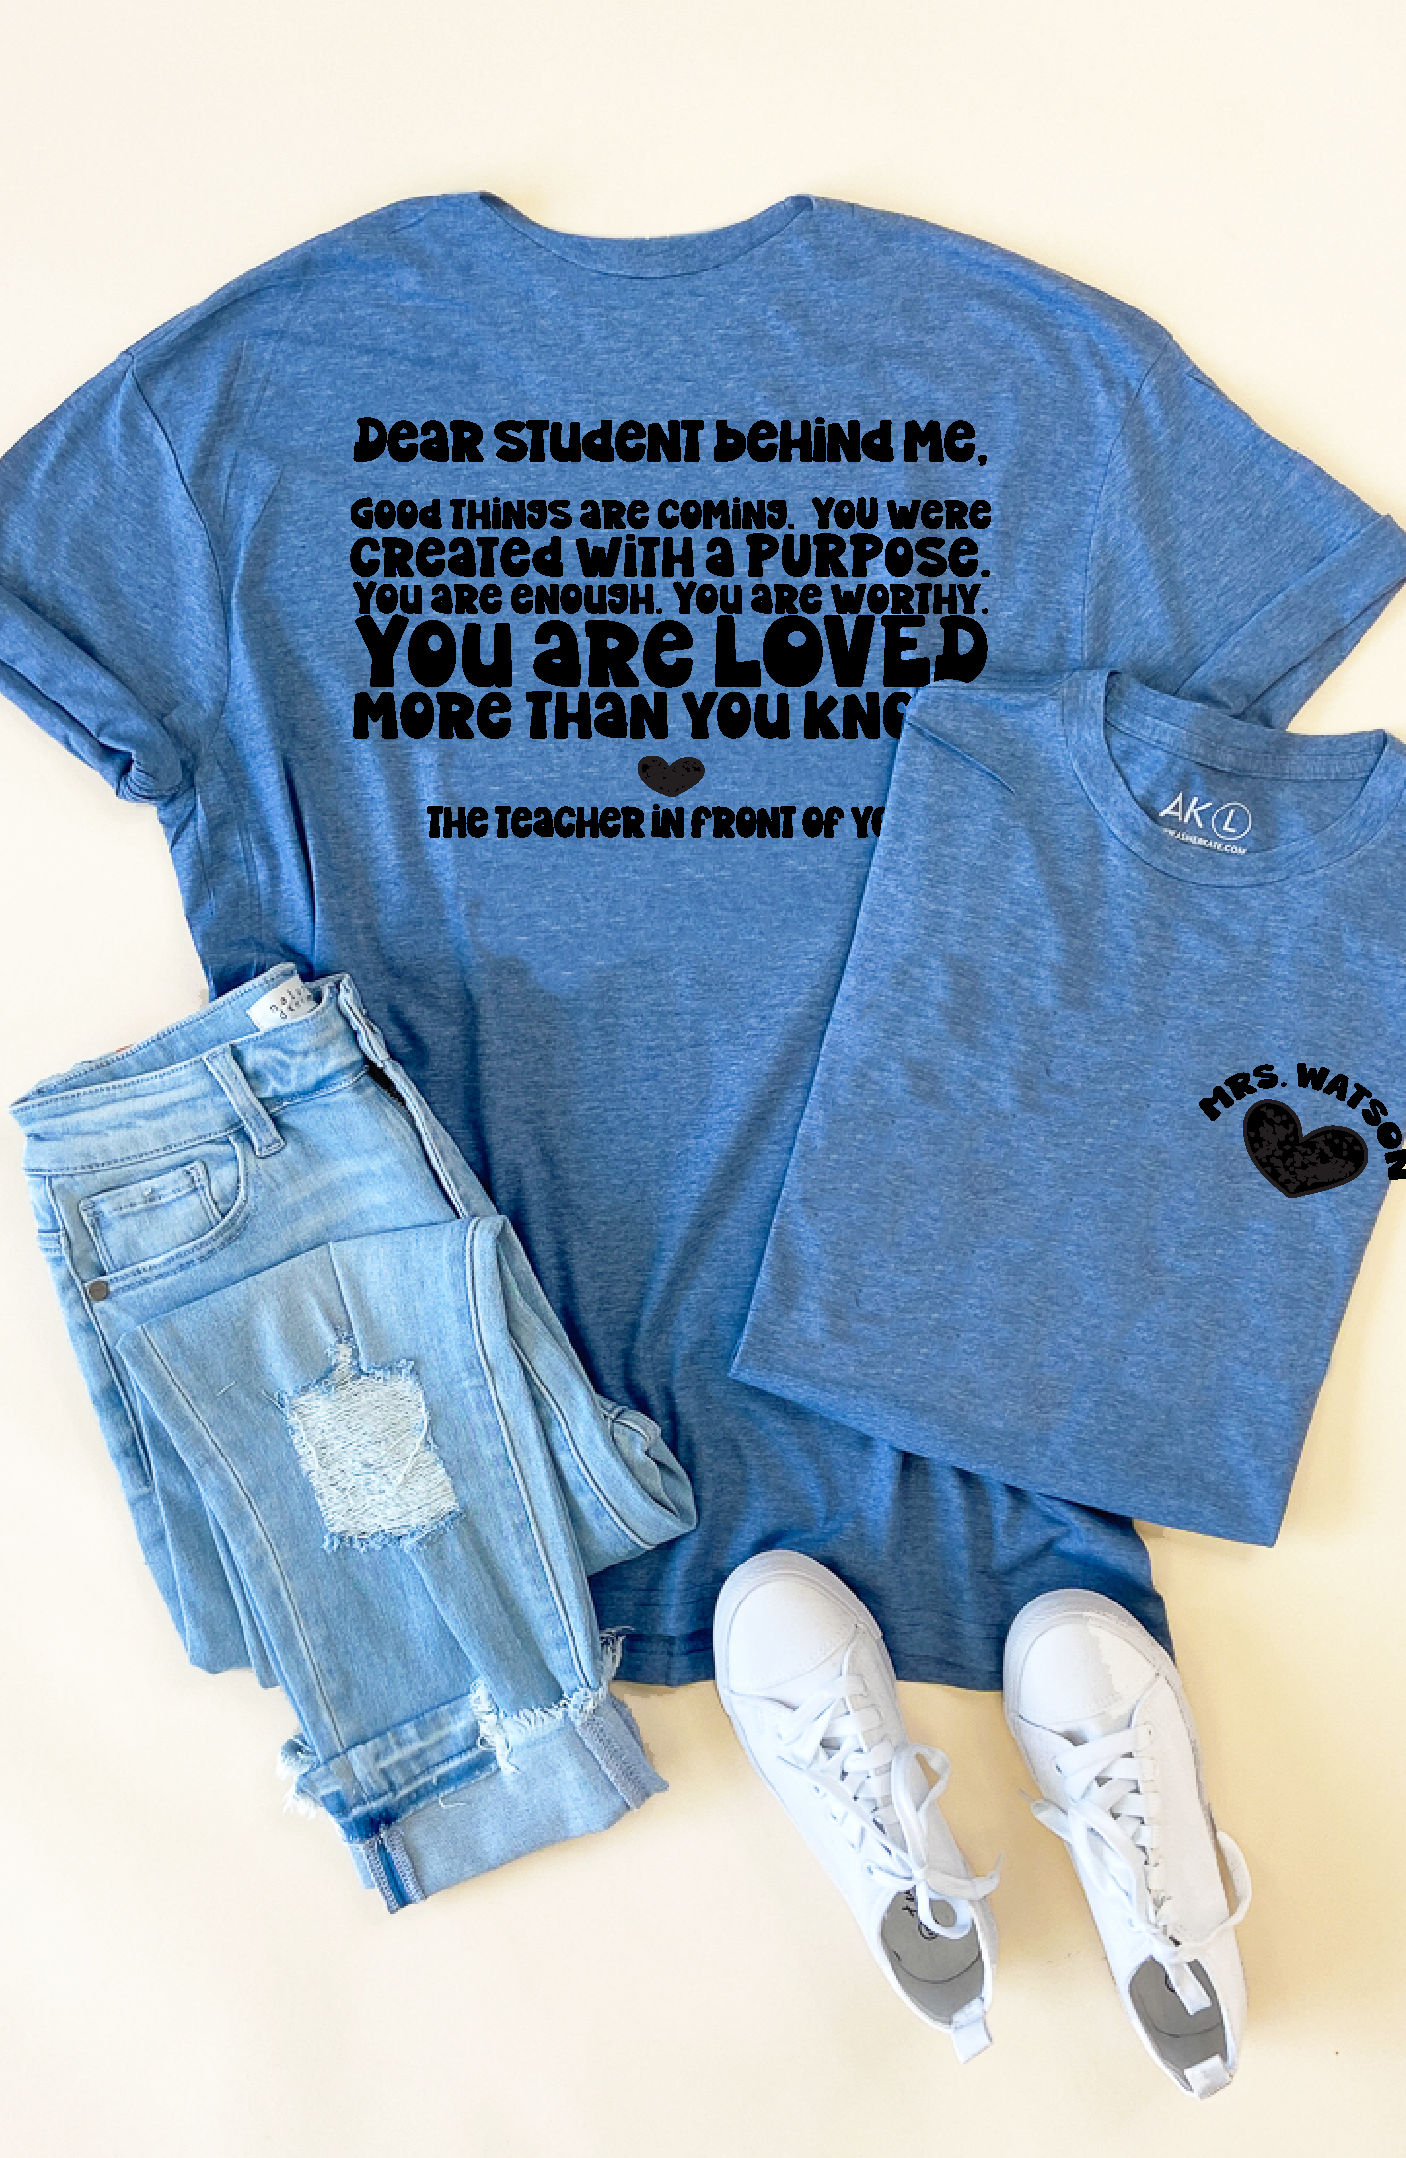 Behind Me Tee - You are Loved